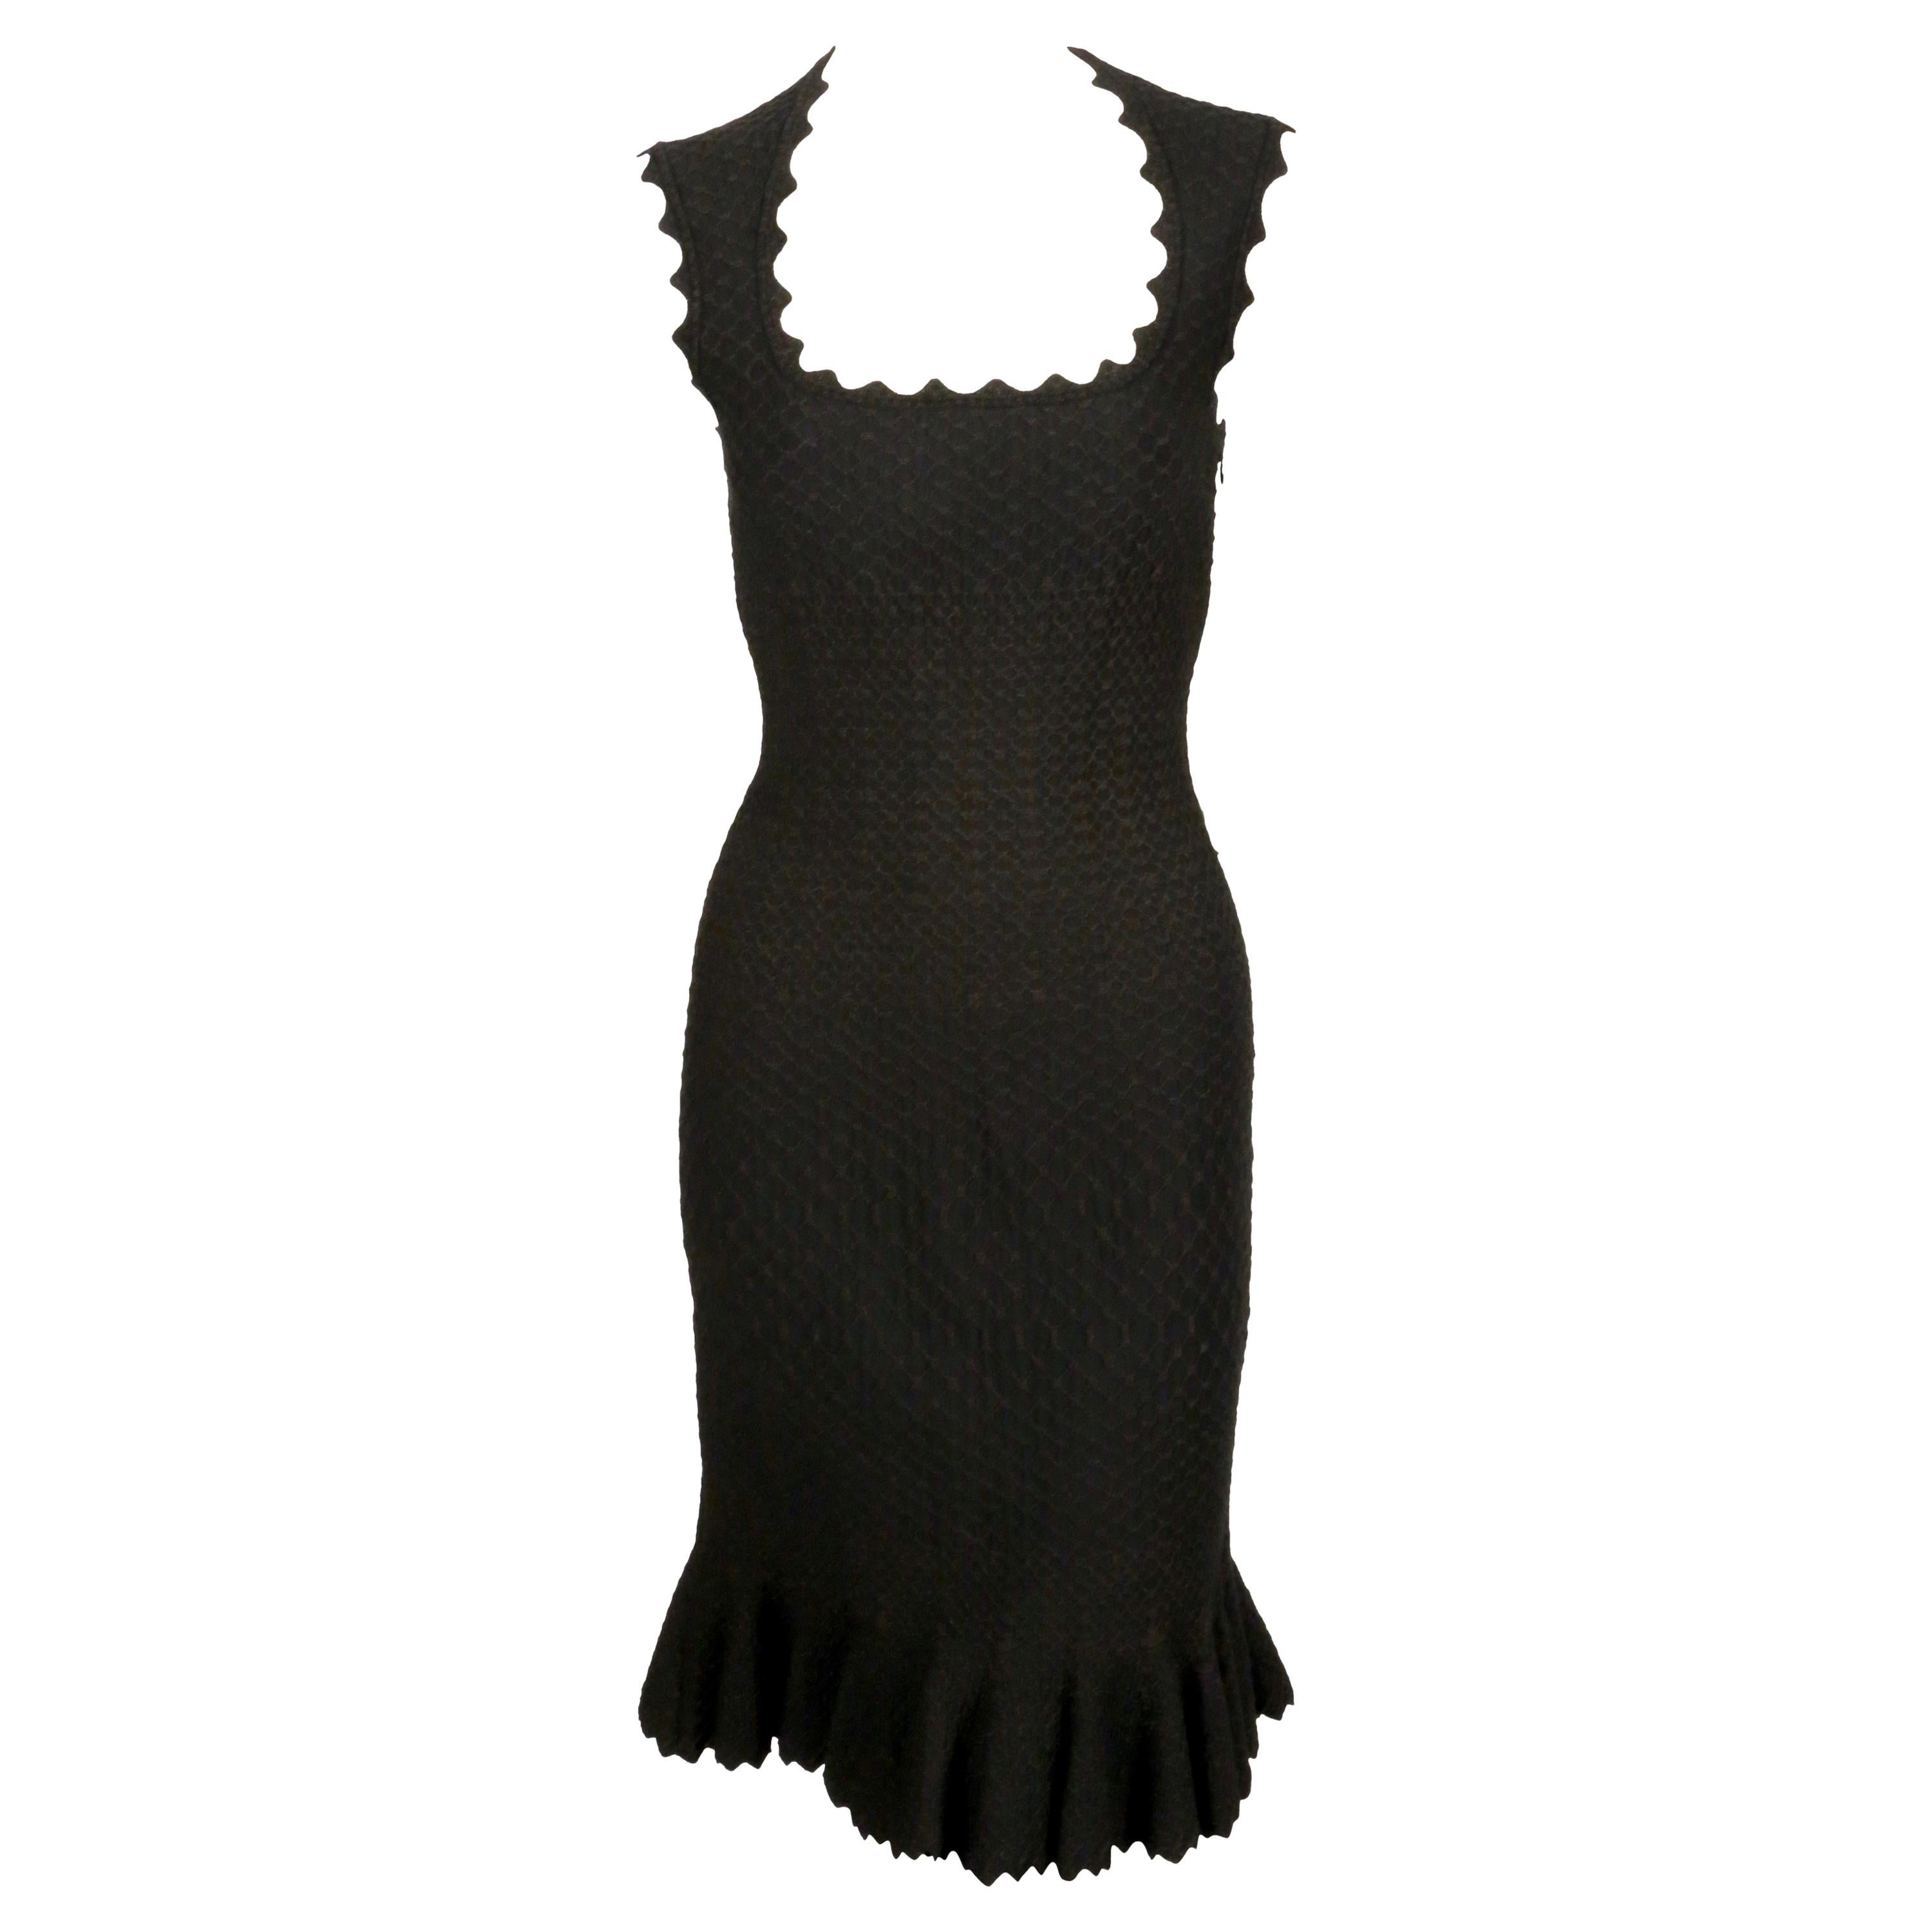 AZZEDINE ALAIA honey-comb woven dress with scalloped neck and fluted hem For Sale